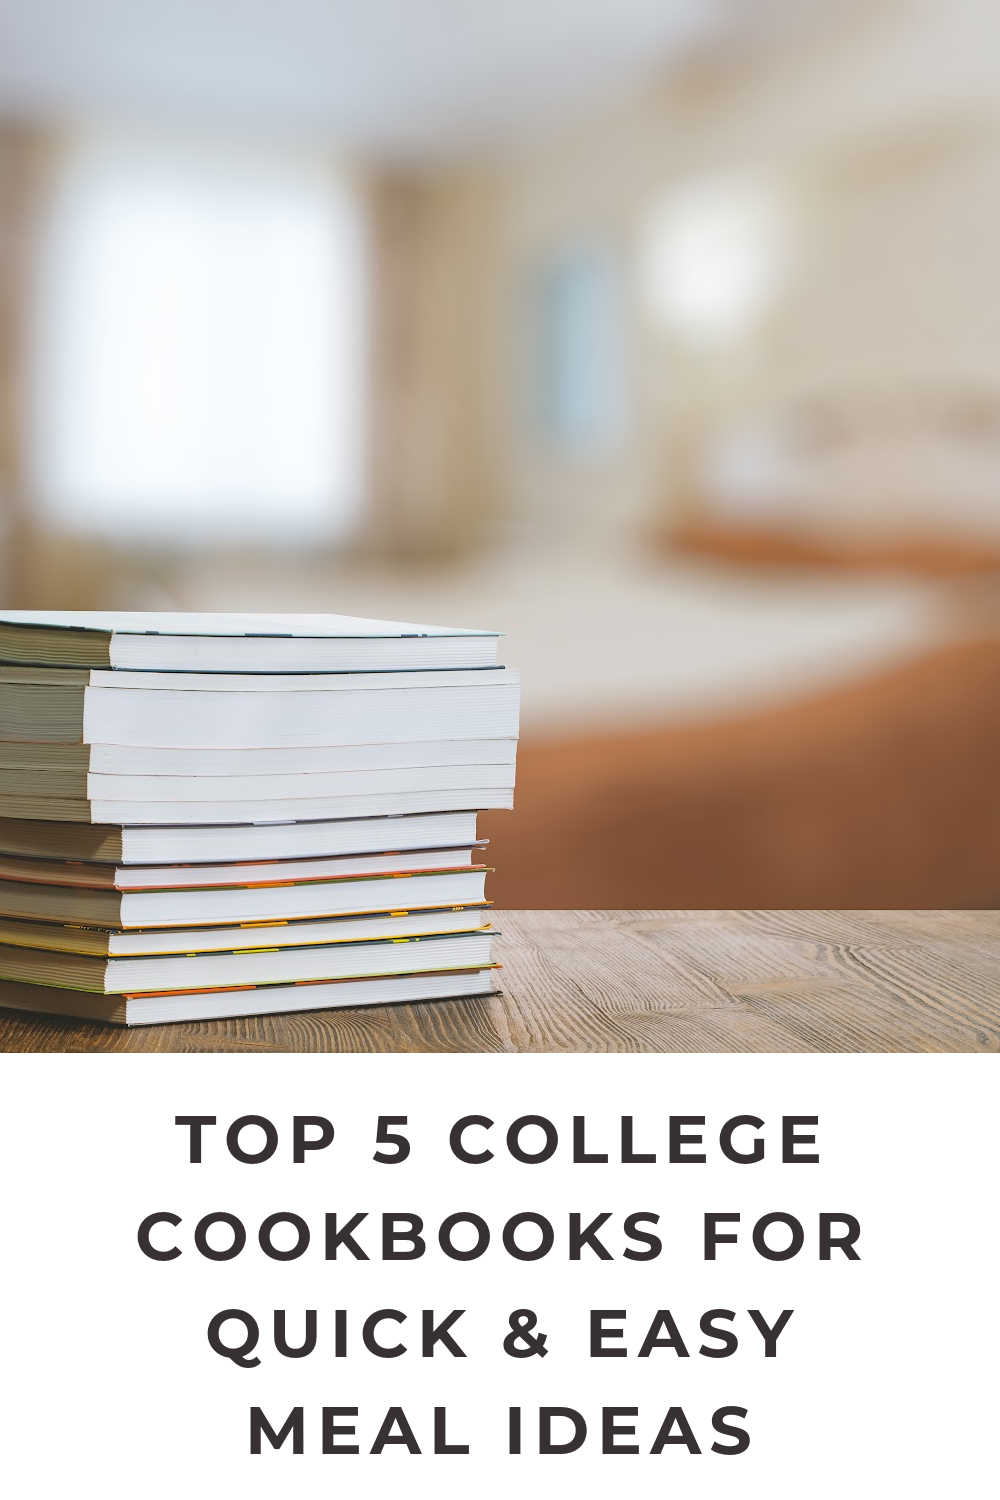 TOP 5 COLLEGE COOKBOOKS FOR QUICK AND EASY MEAL IDEAS